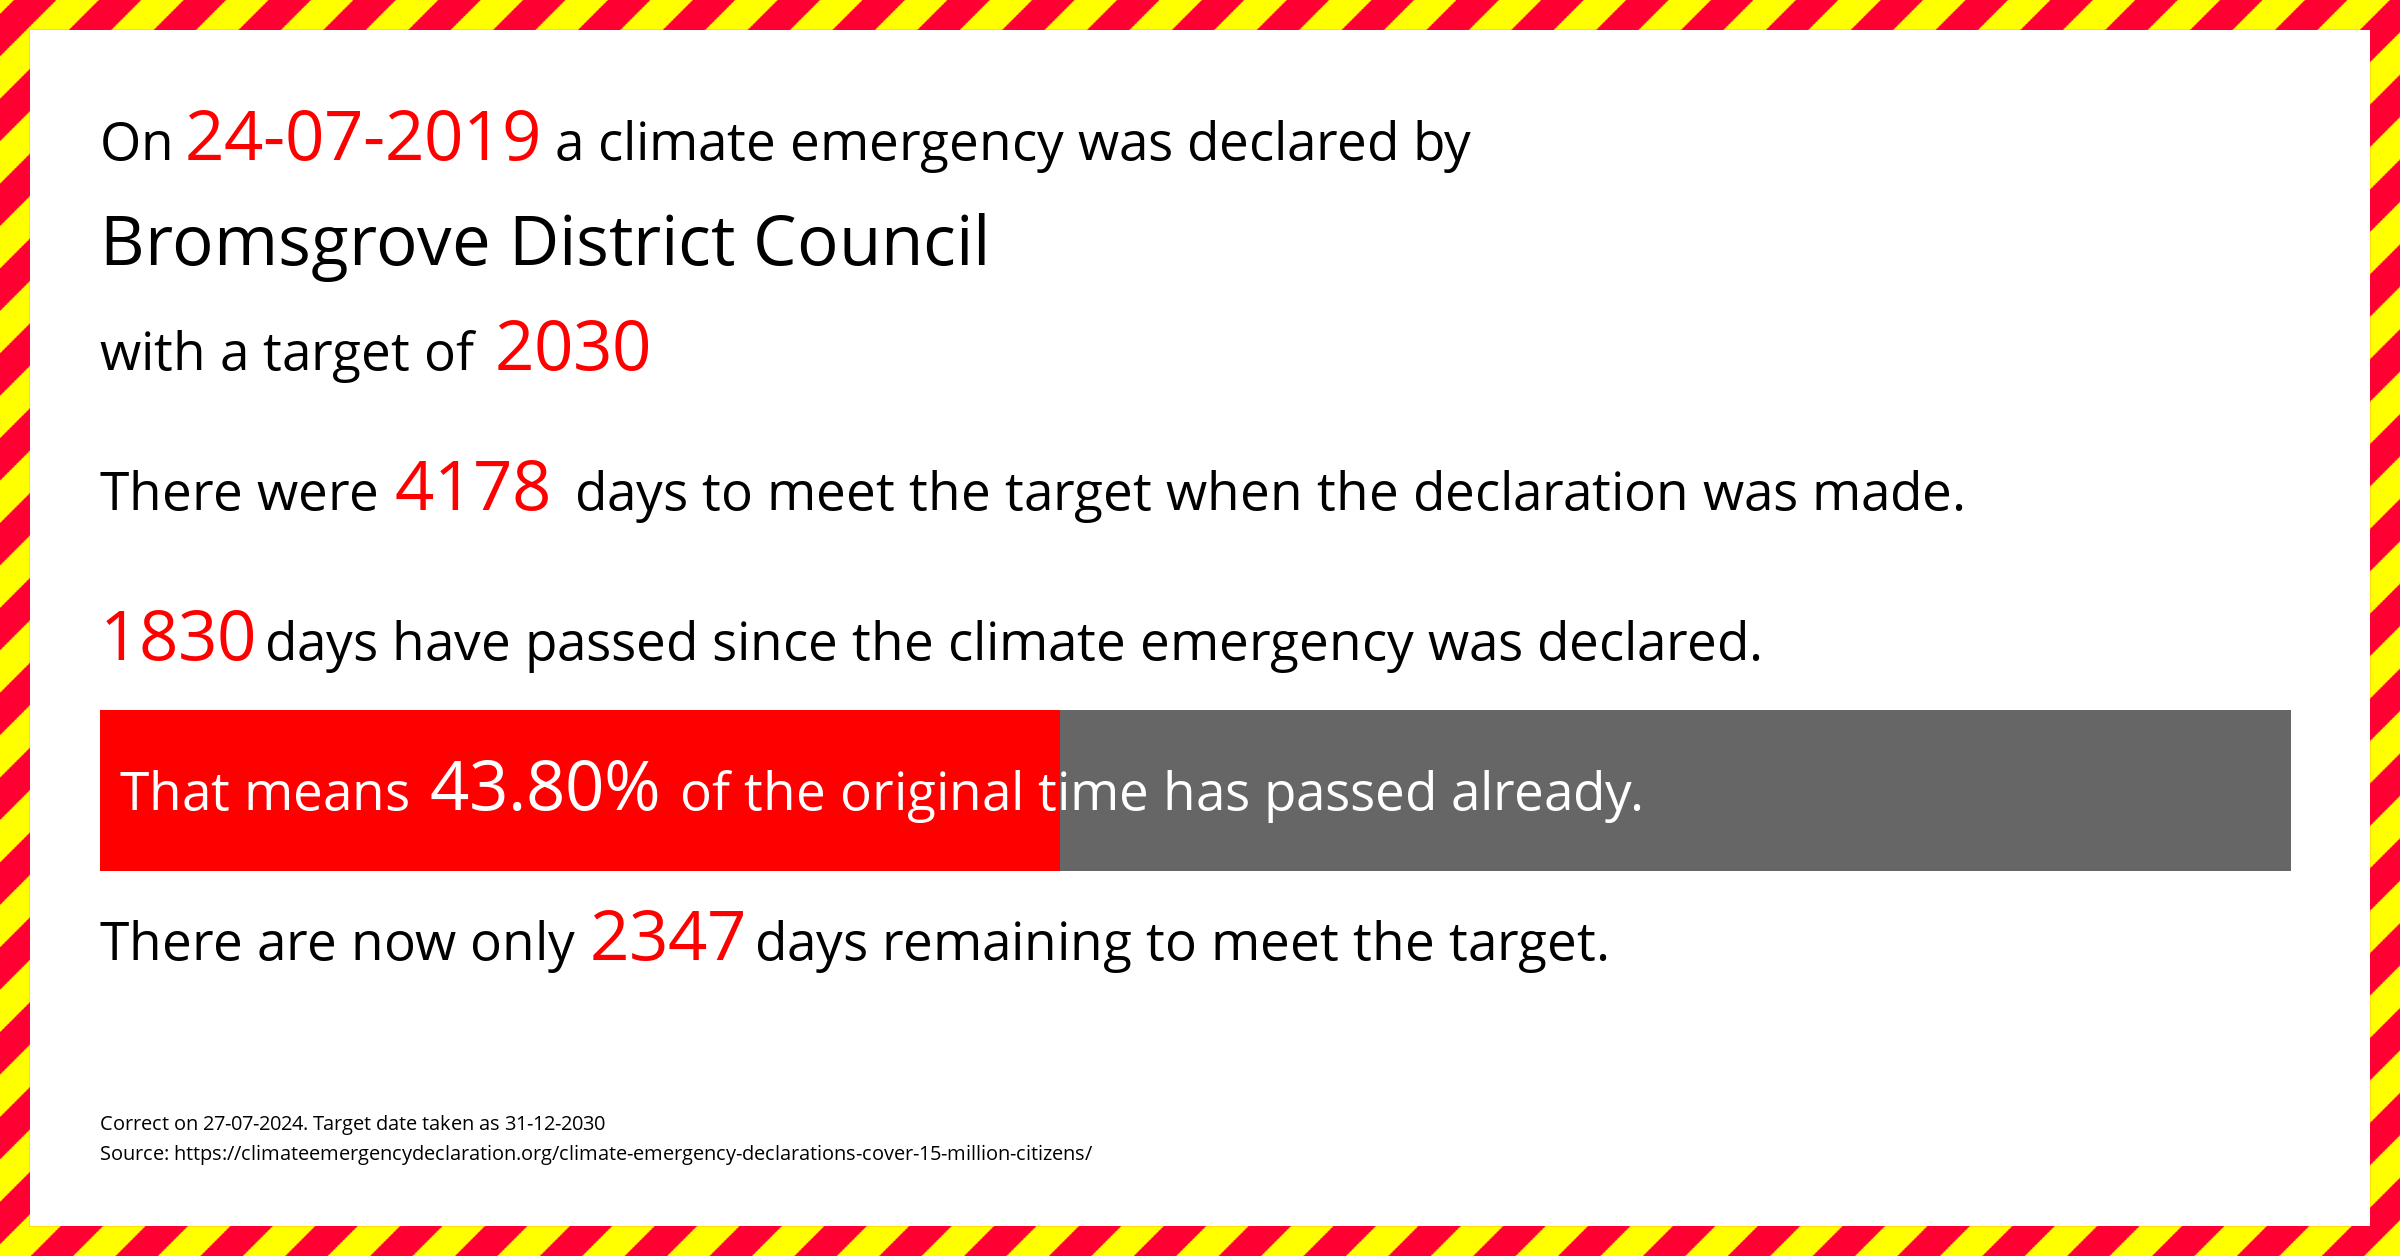 Bromsgrove District Council declared a Climate emergency on Wednesday 24th July 2019, with a target of 2030.